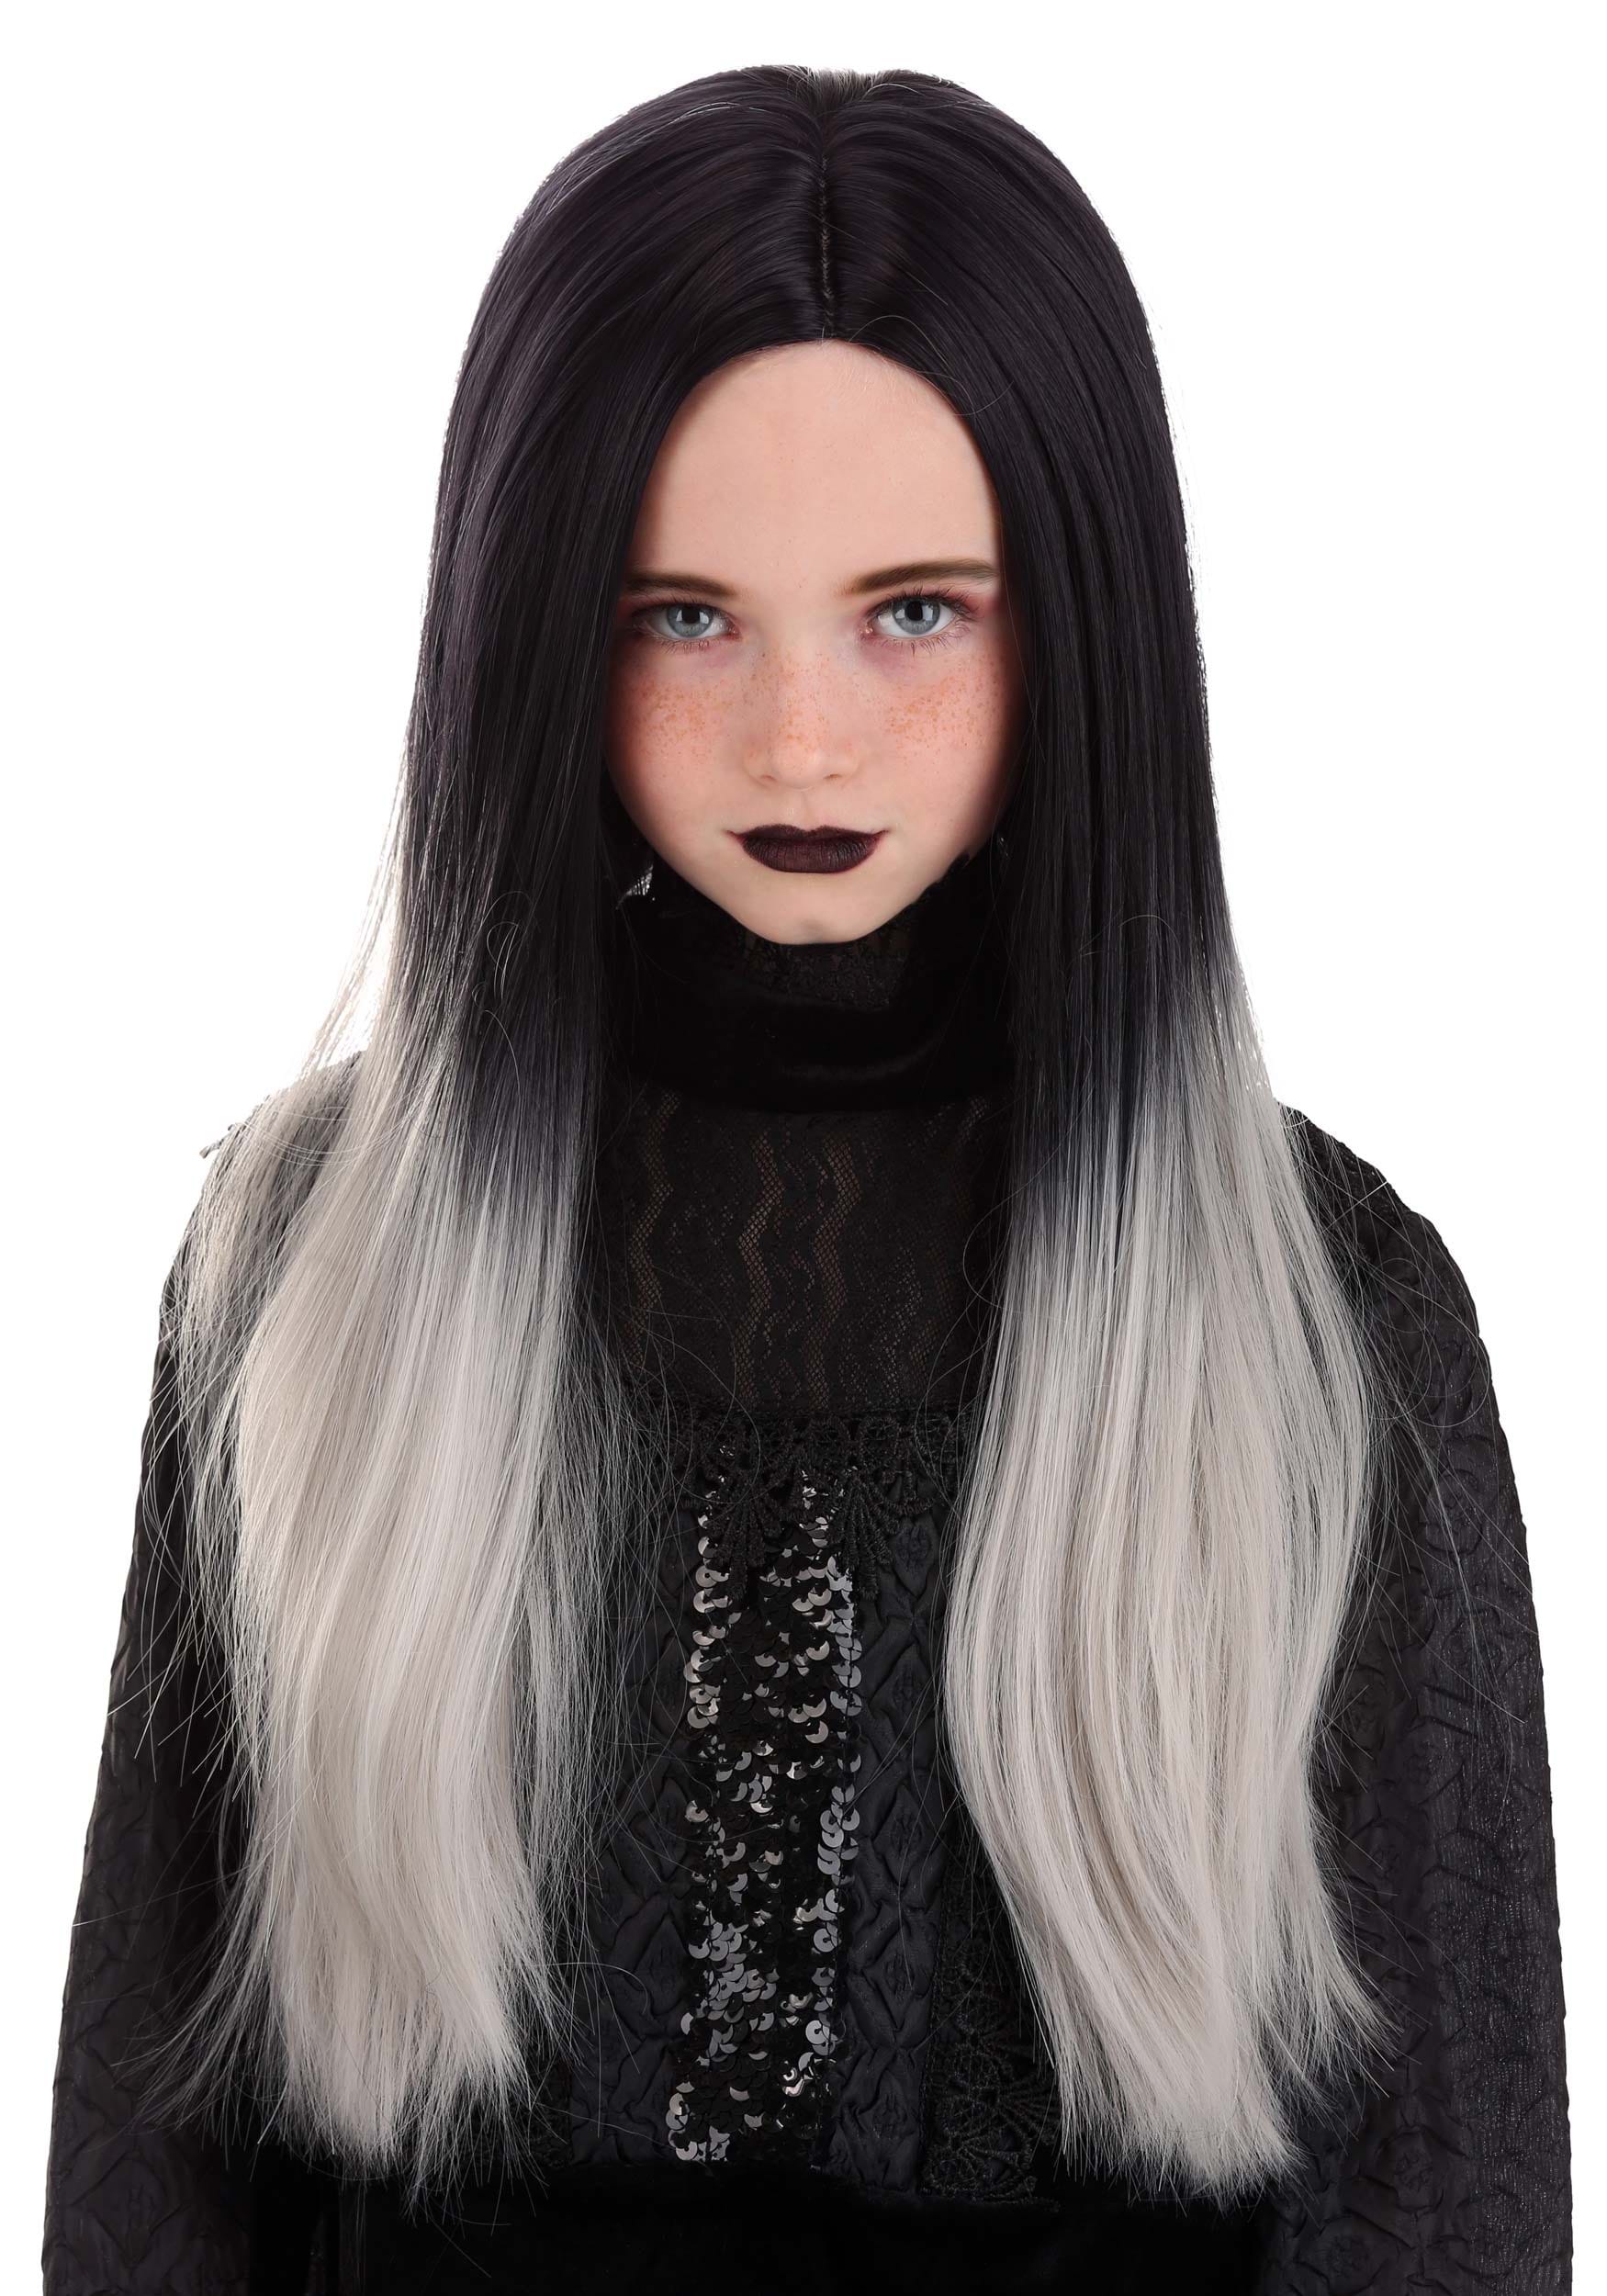 Kid’s Black and Gray Ombre Wig